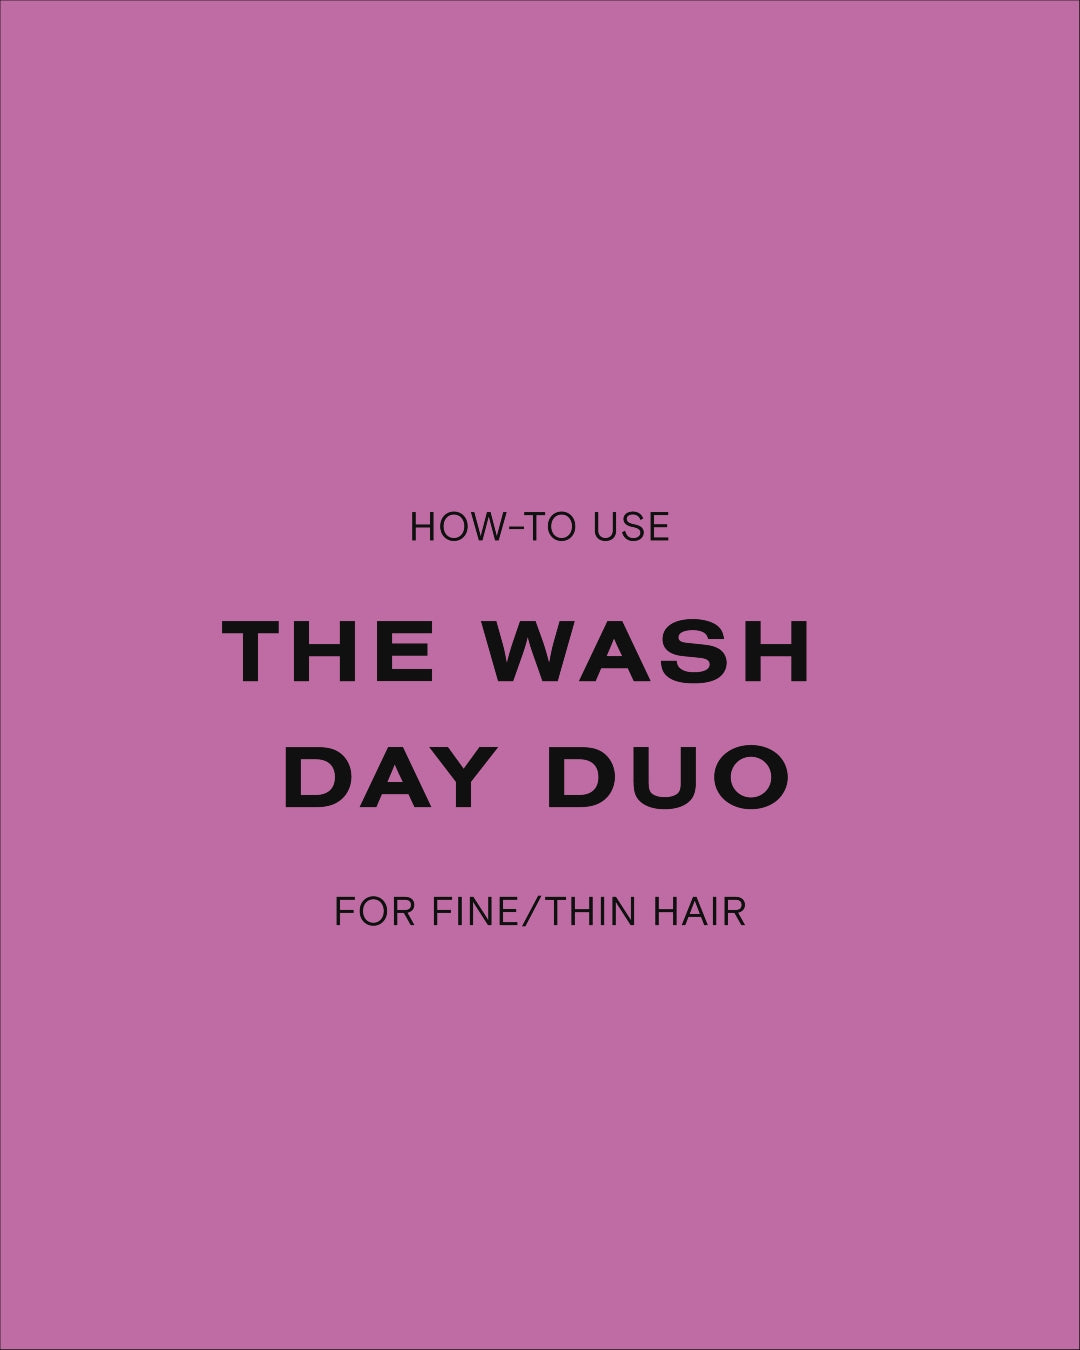 3 Tips For A Quick Summer Wash Day Routine